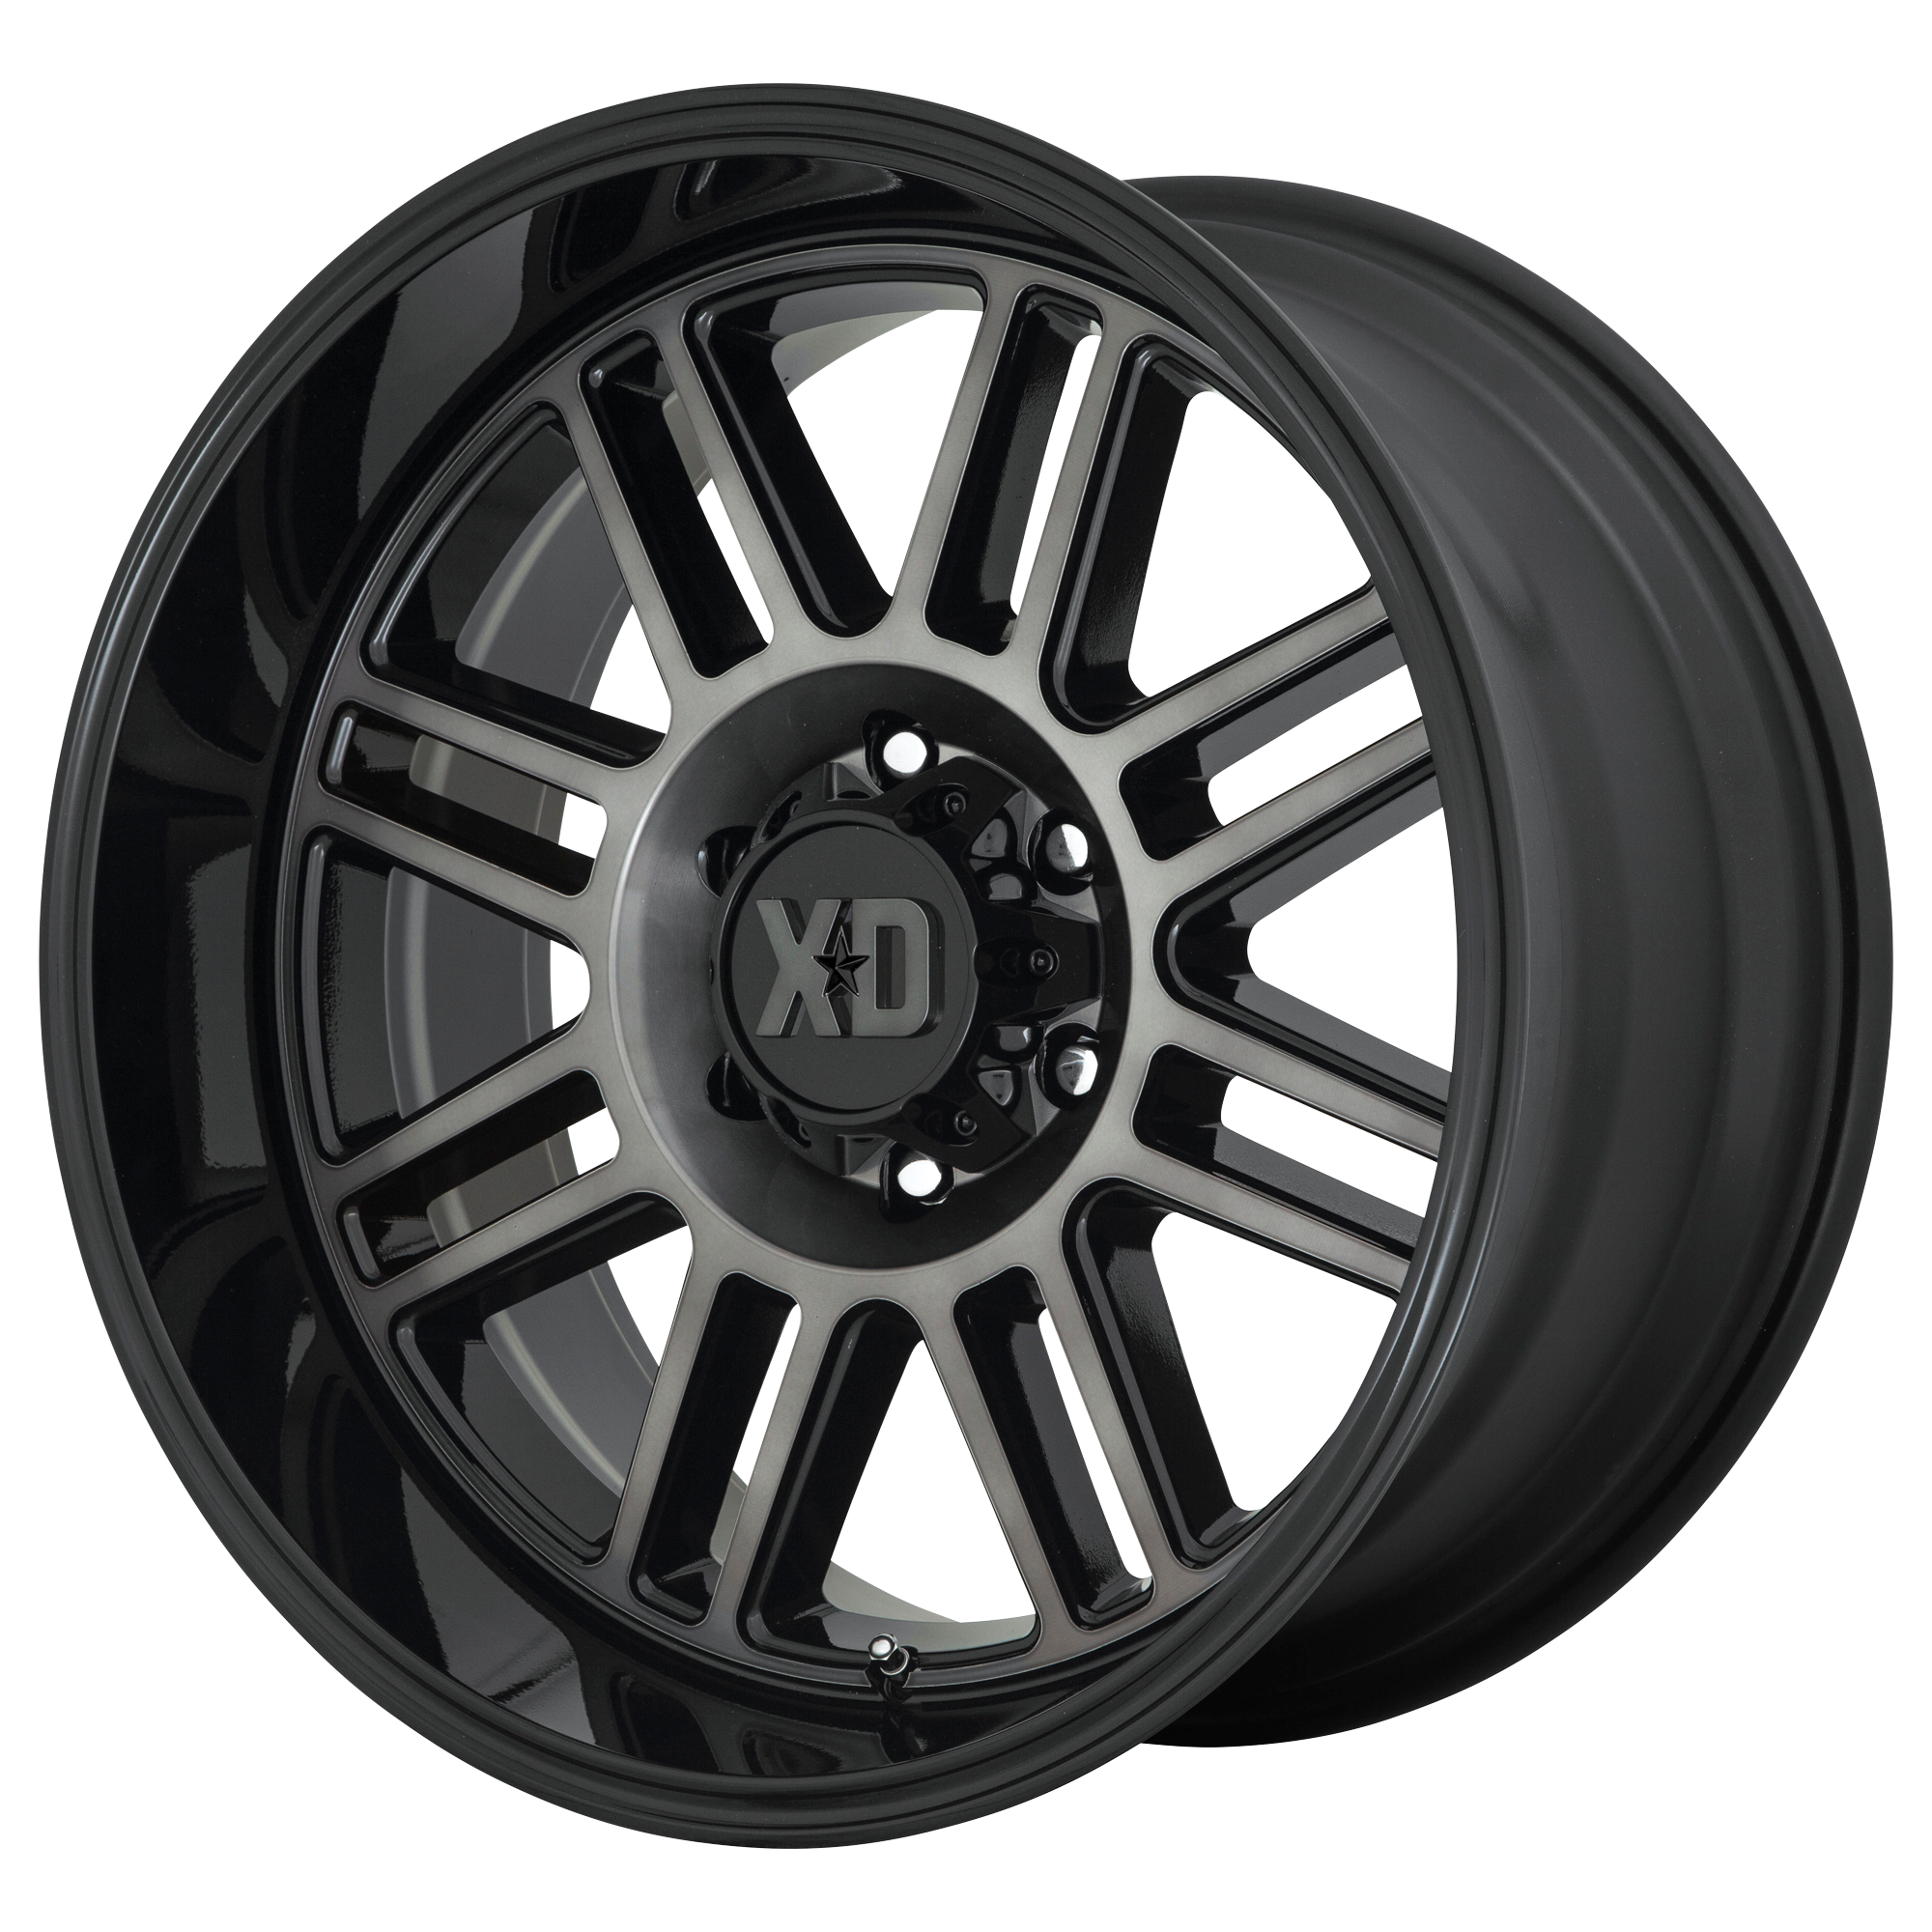 CAGE 20x9 8x180.00 GLOSS BLACK W/ GRAY TINT (18 mm) - Tires and Engine Performance